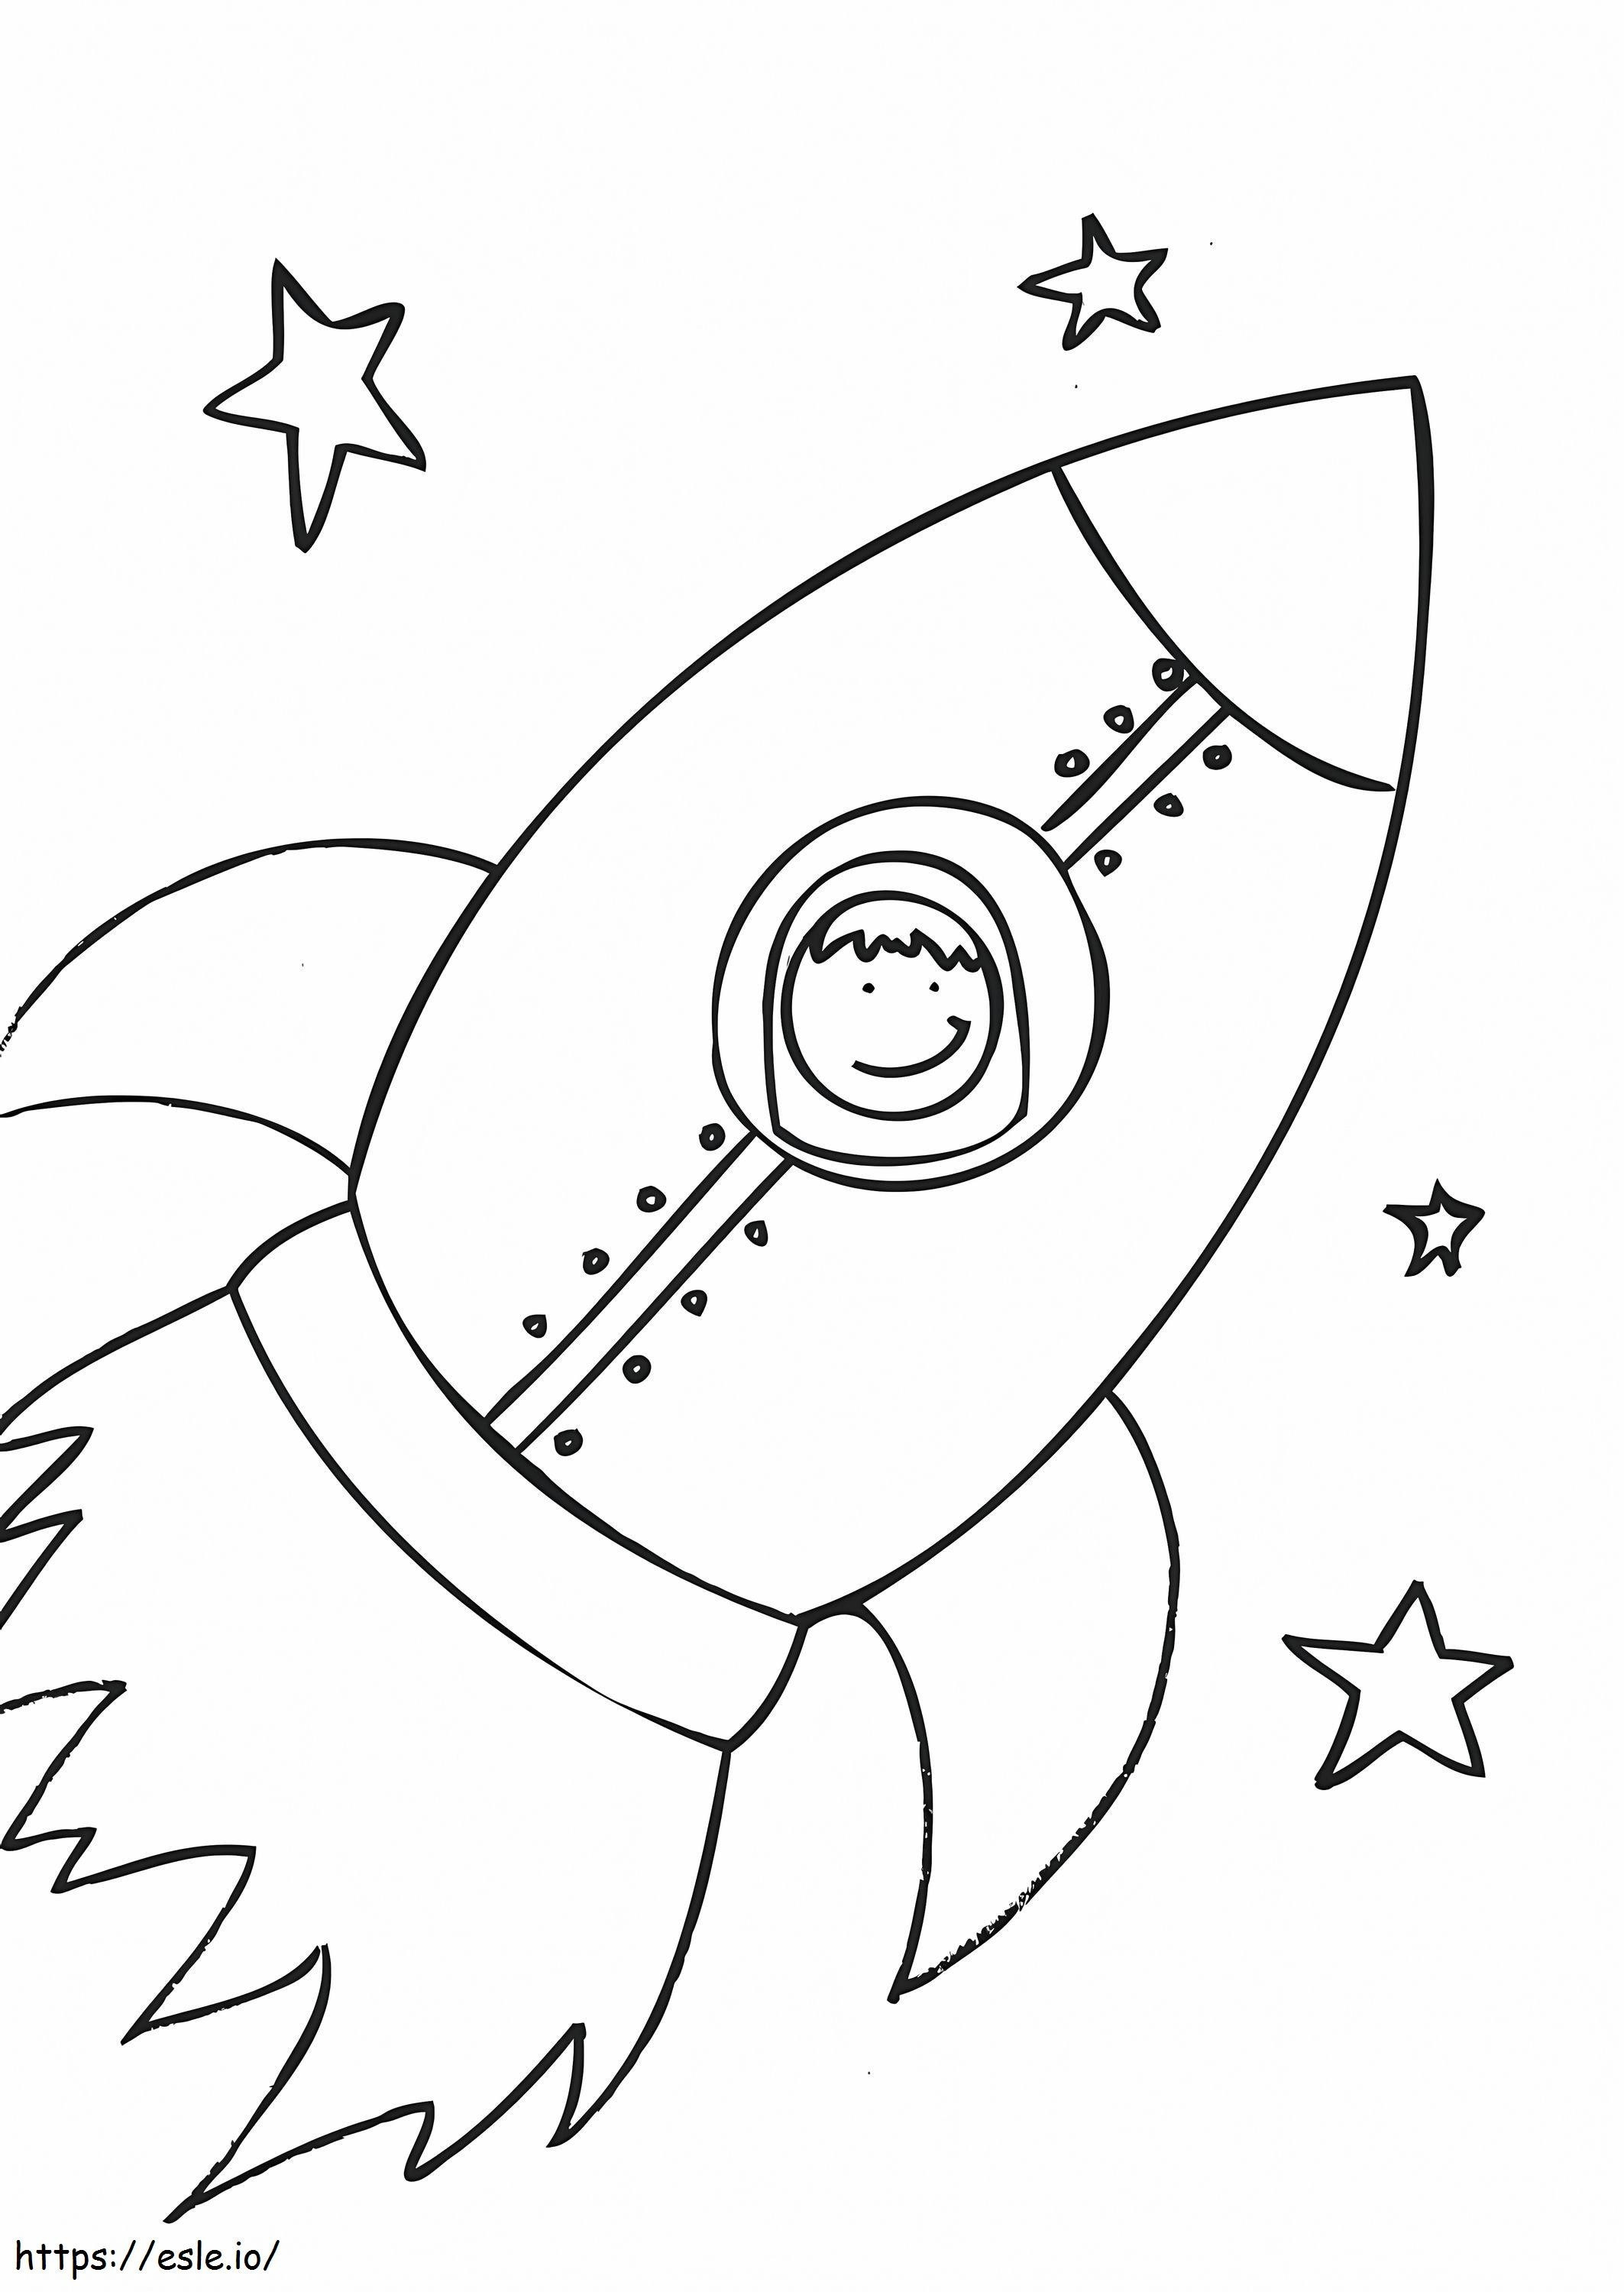 People In A Rocket coloring page